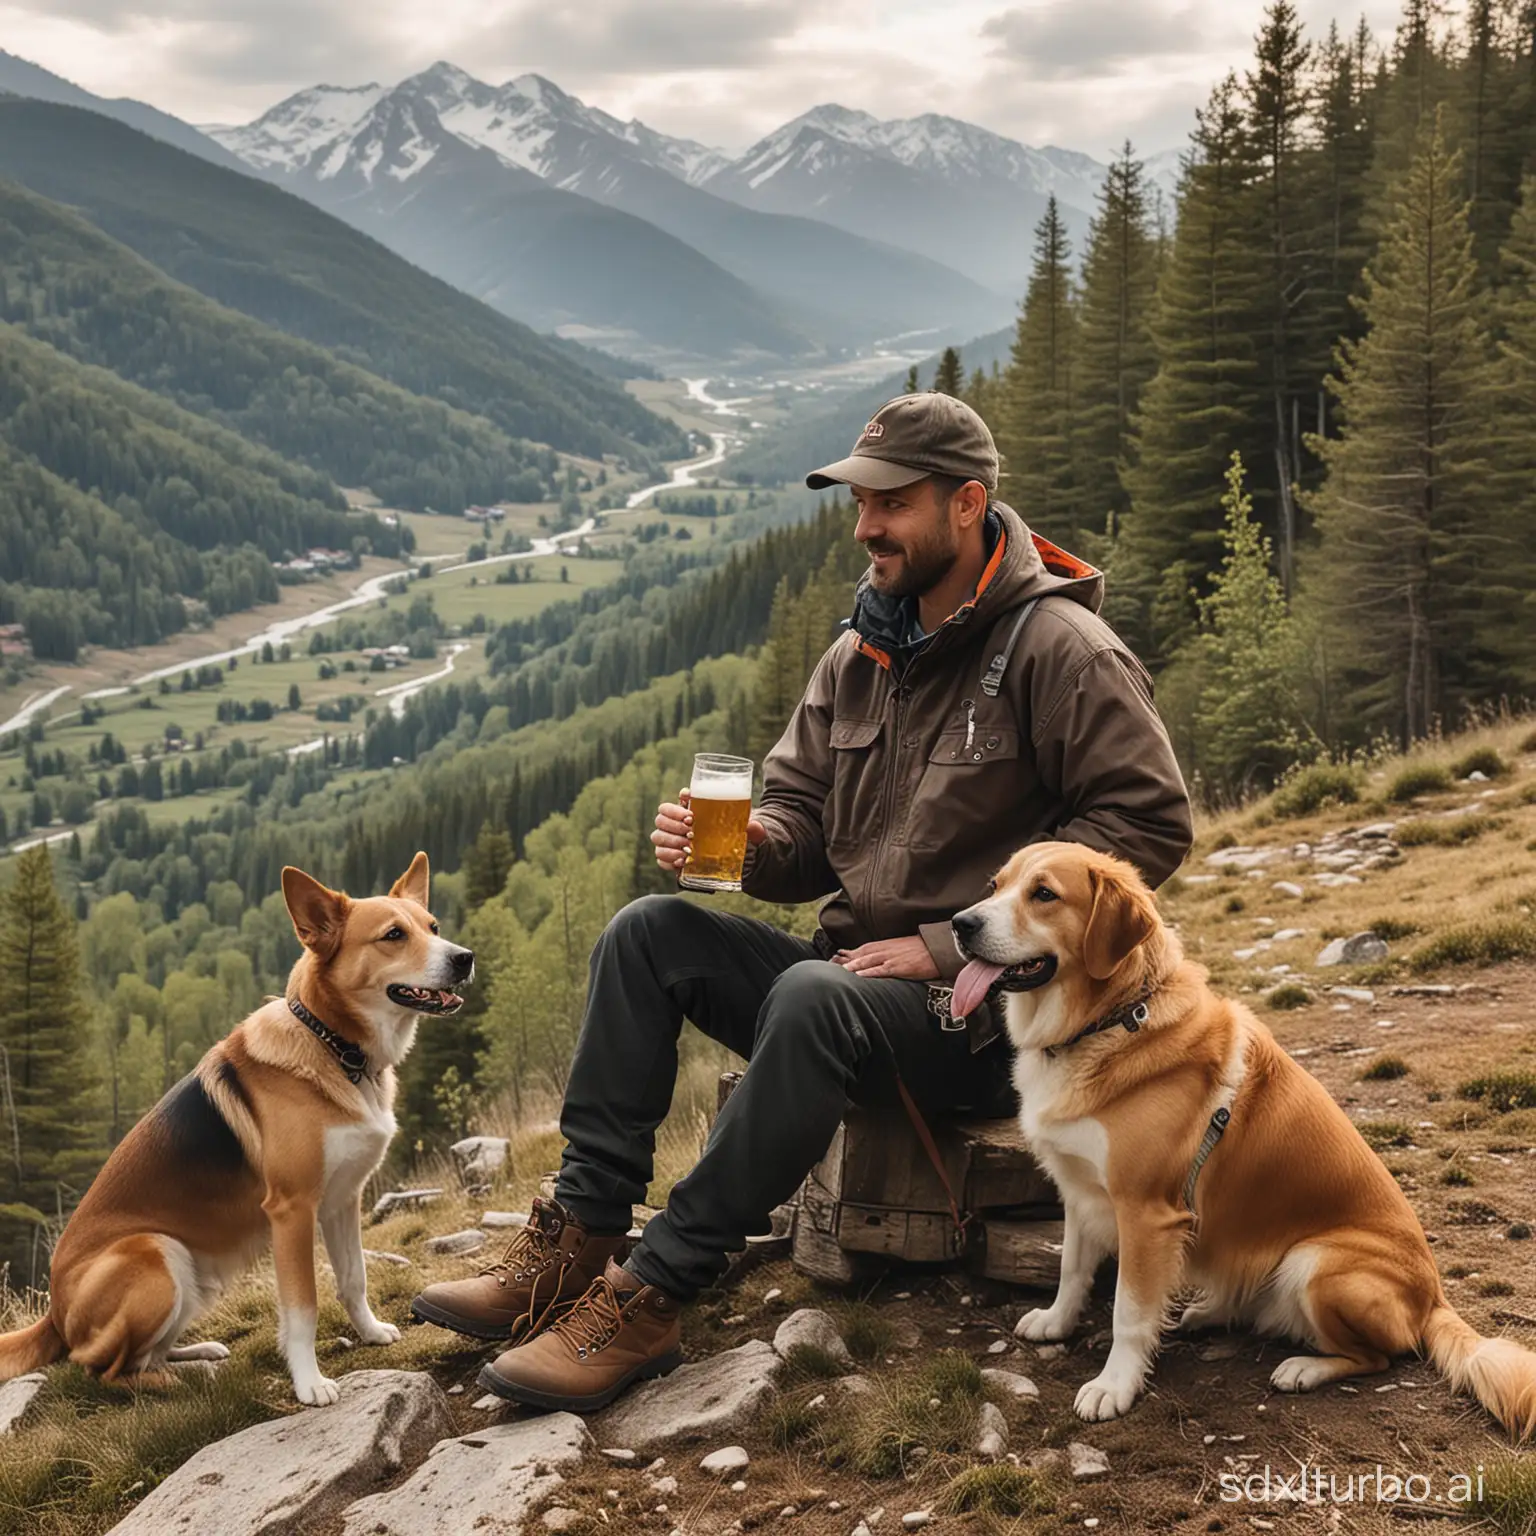 Man-Enjoying-Beer-with-Dog-in-Mountainous-Forest-Setting